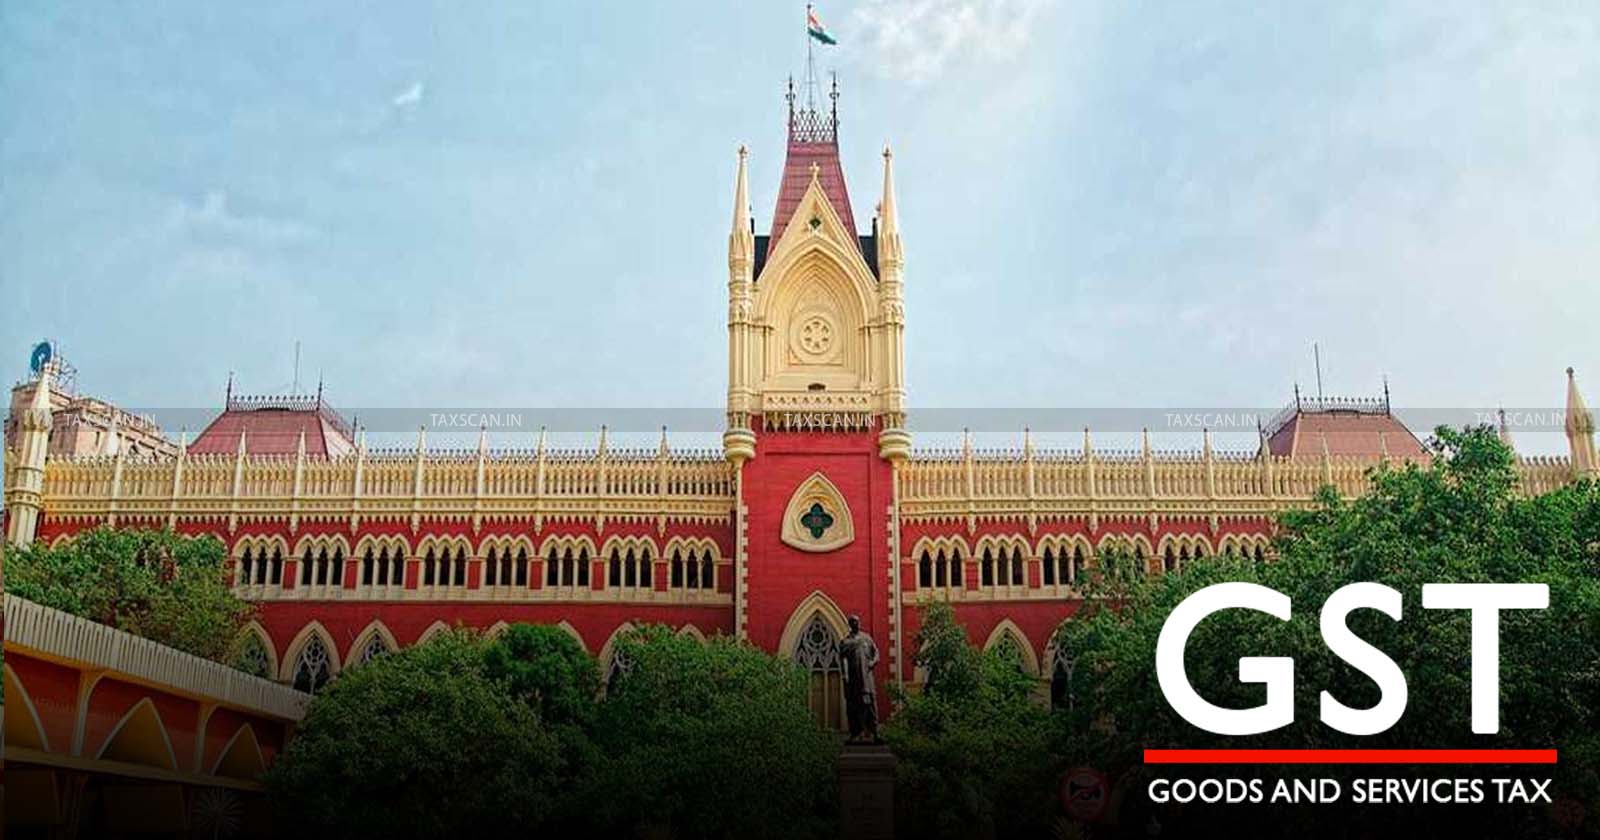 Contract Executed for WBSRDA provide for GST Payment - Calcutta HC orders to file Statutory Appeal - TAXSCAN